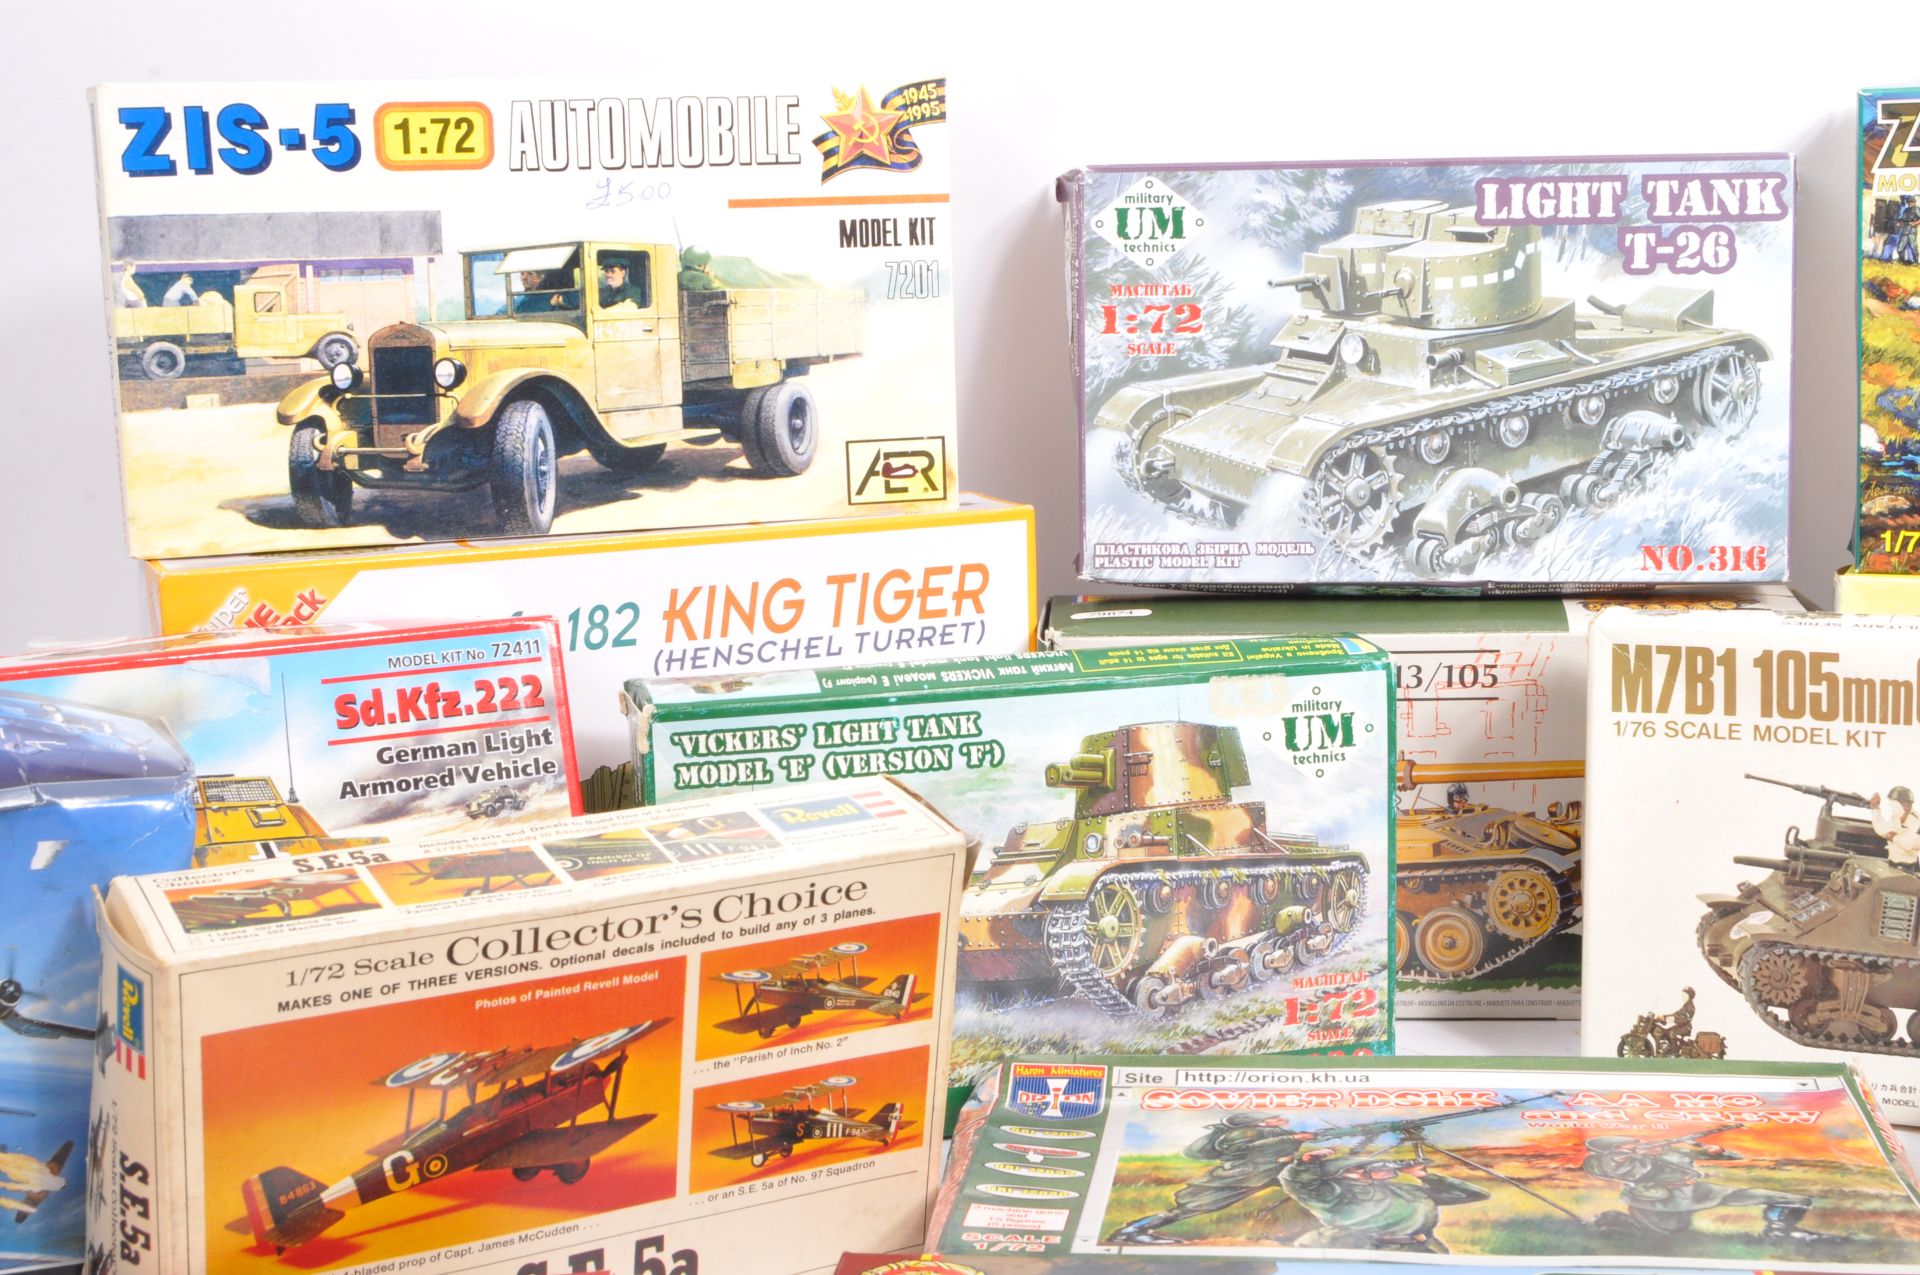 MODEL KITS - COLLECTION OF PLASTIC MODEL KITS - Image 3 of 6